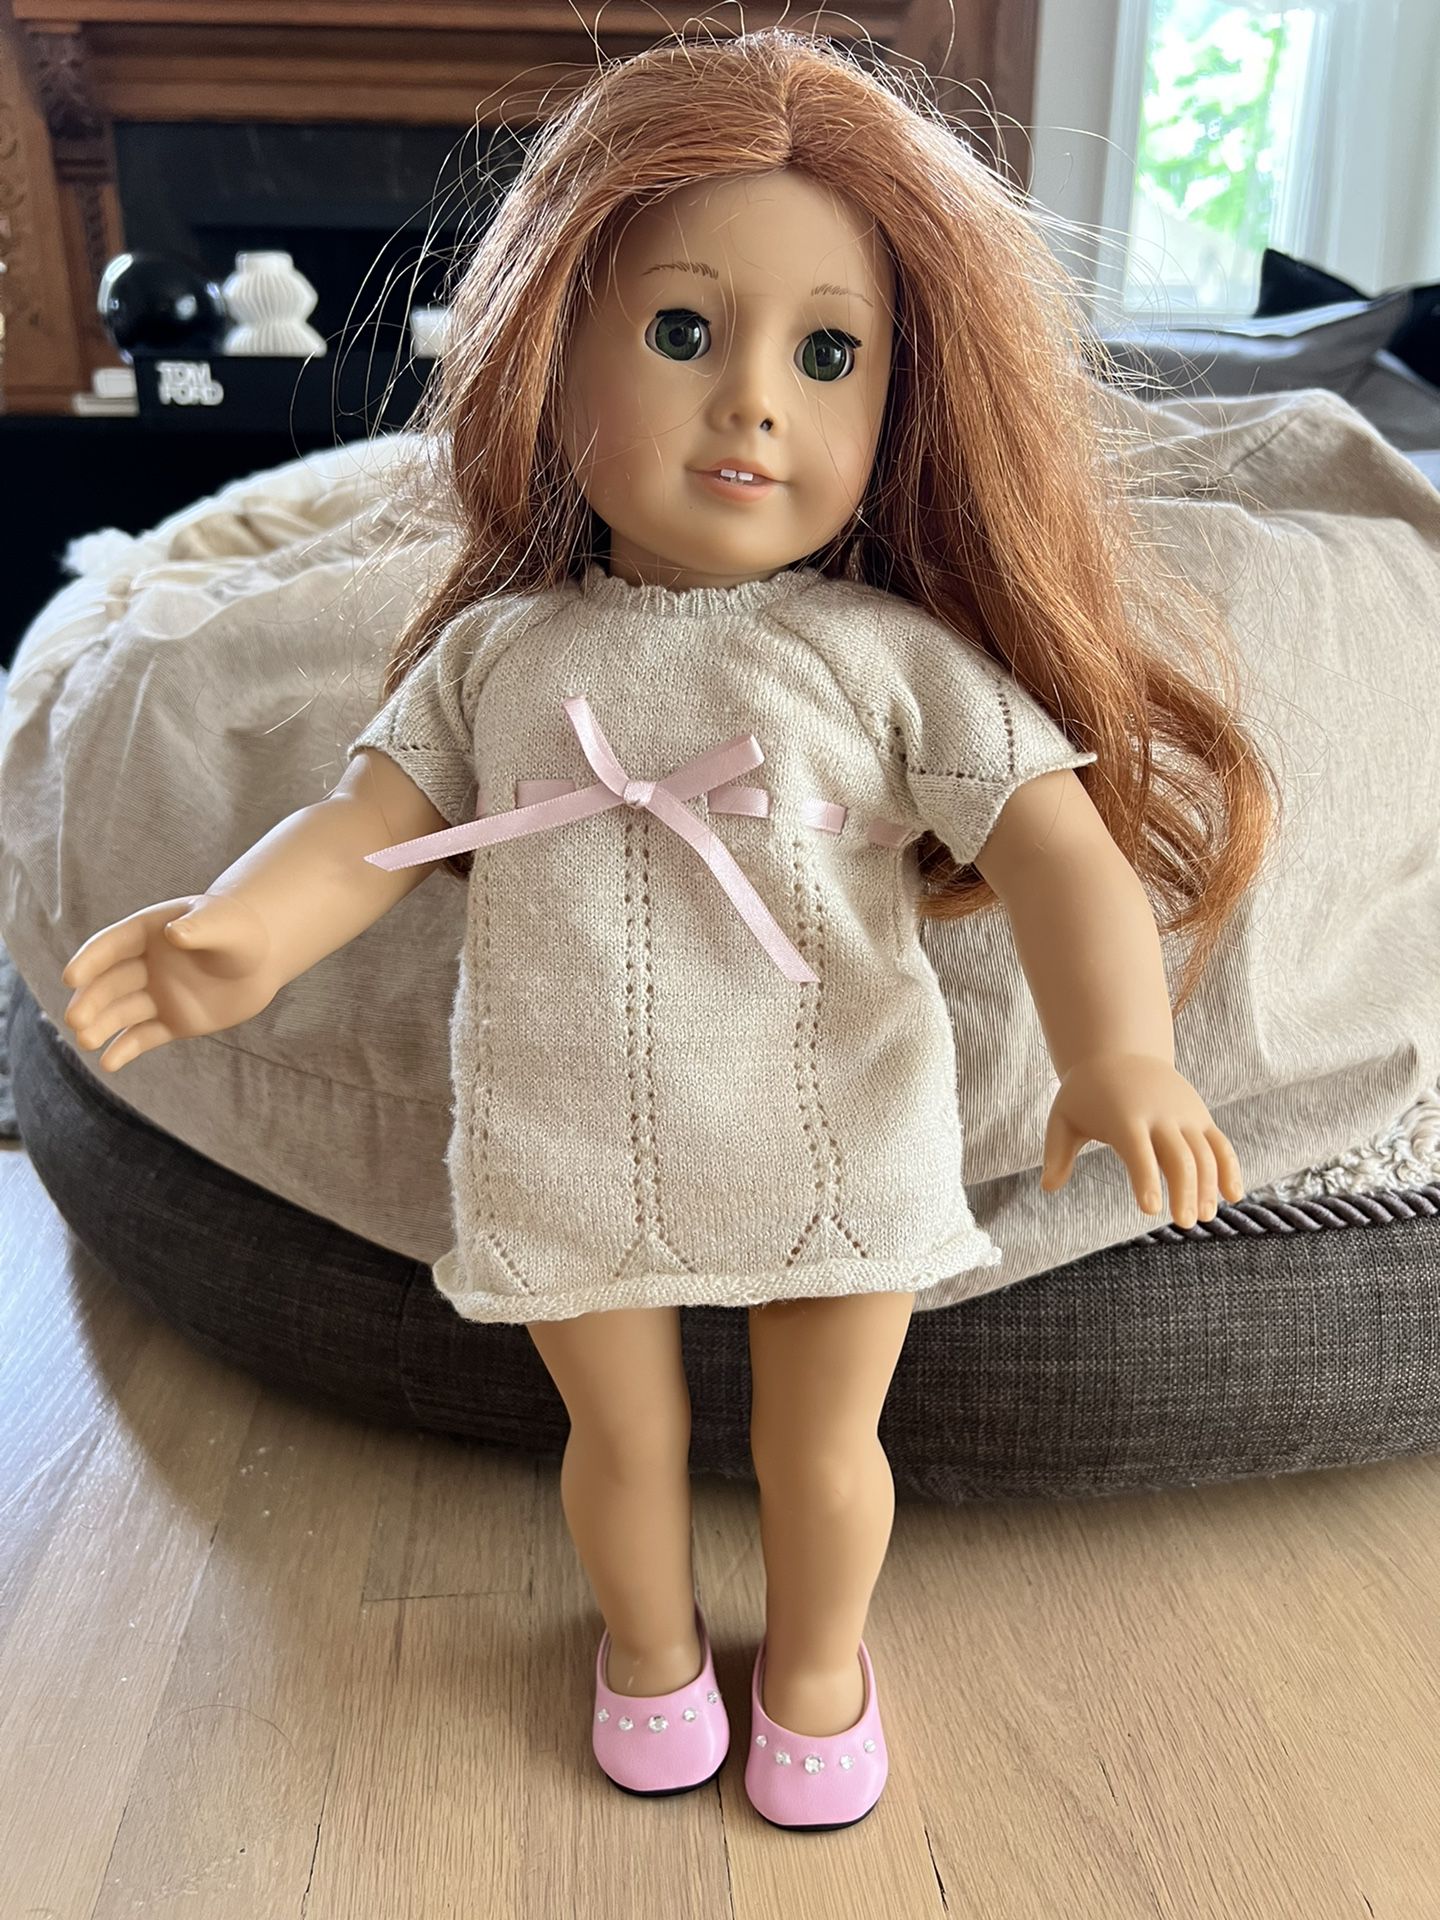 Mint Condition American Girl Doll And Accessory Collection with 3 Dolls, 4 Pets, +7 Play Sets, +15 Dress Sets, Beds, Hoop, And More!